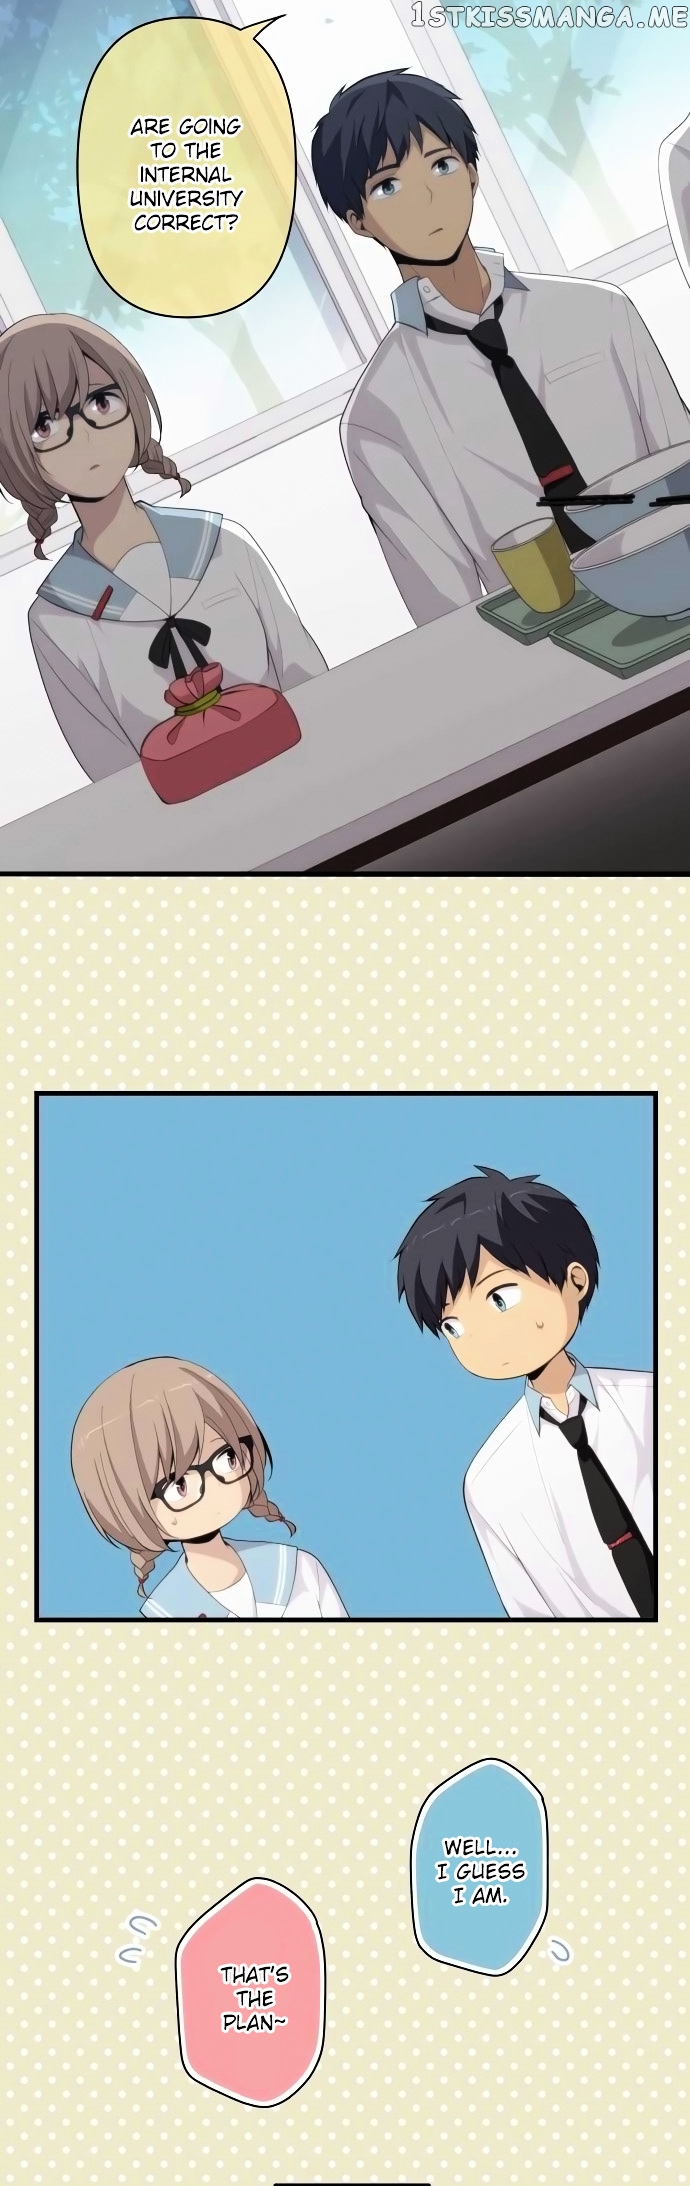 ReLIFE chapter 161 v2 - page 6